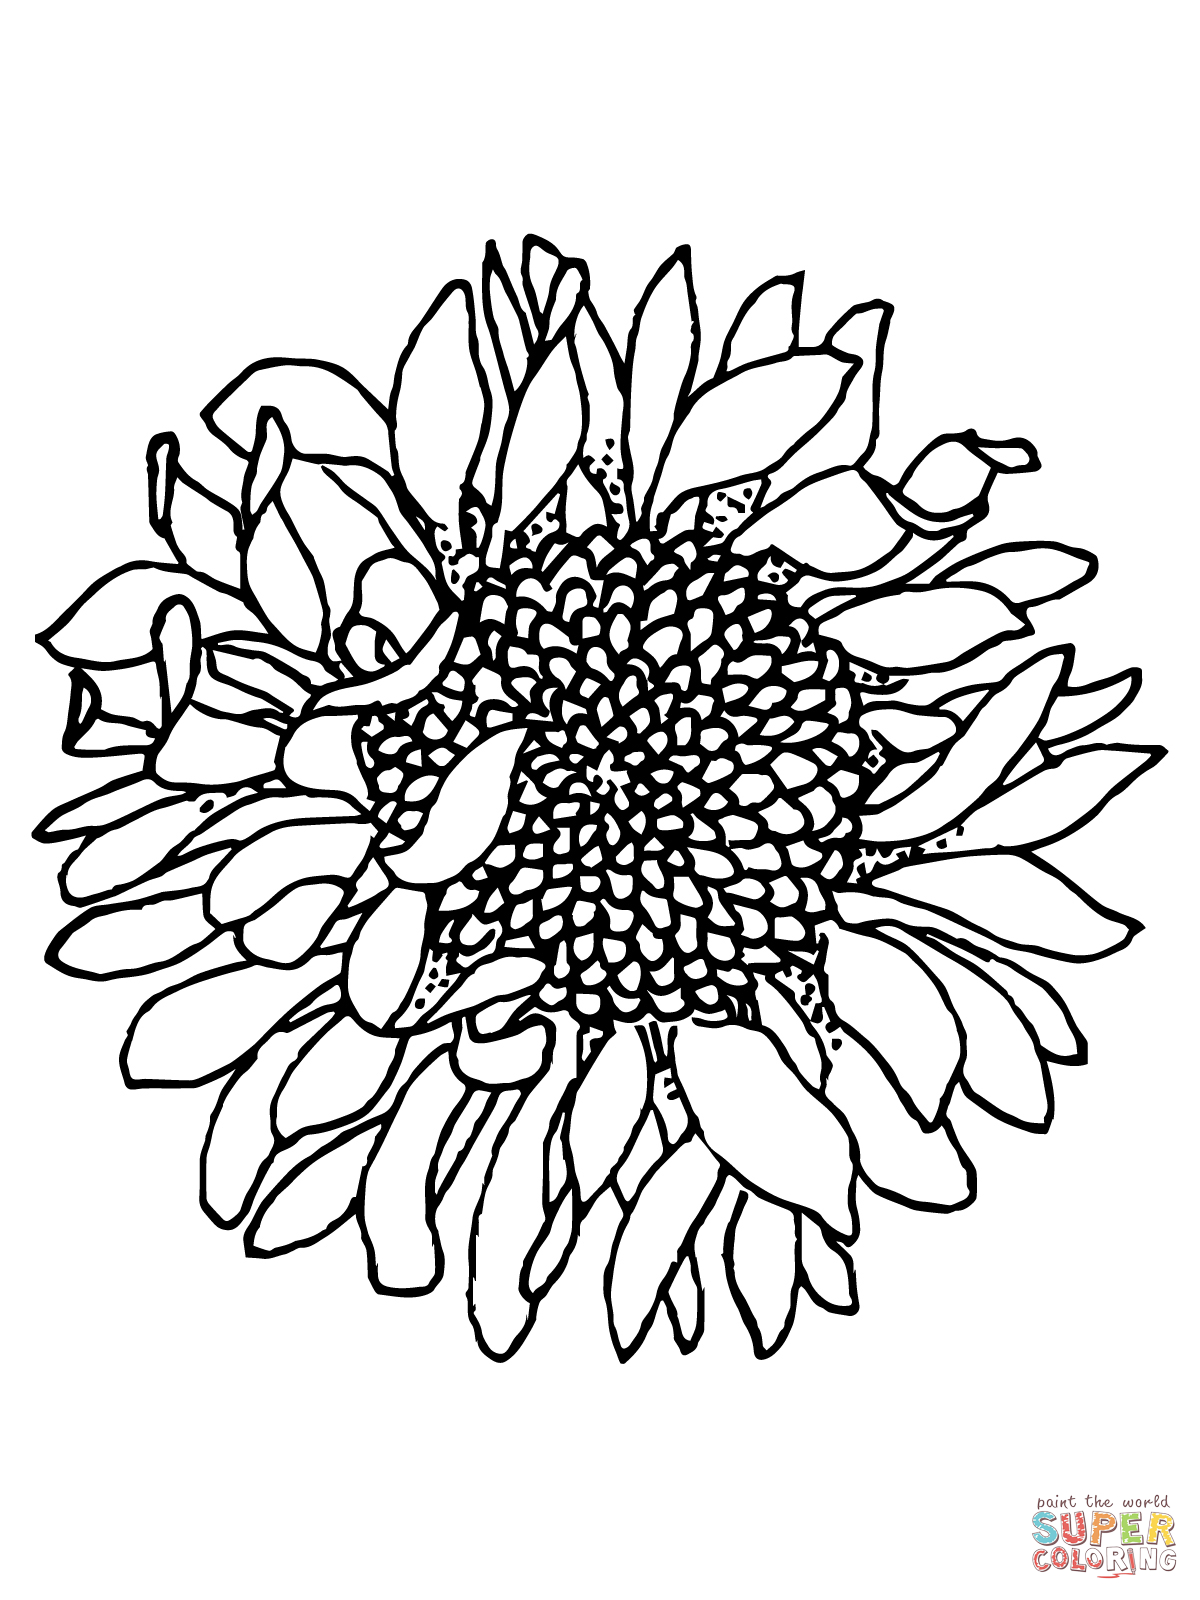 Free Sunflower Coloring Page Download Free Sunflower Coloring Page png